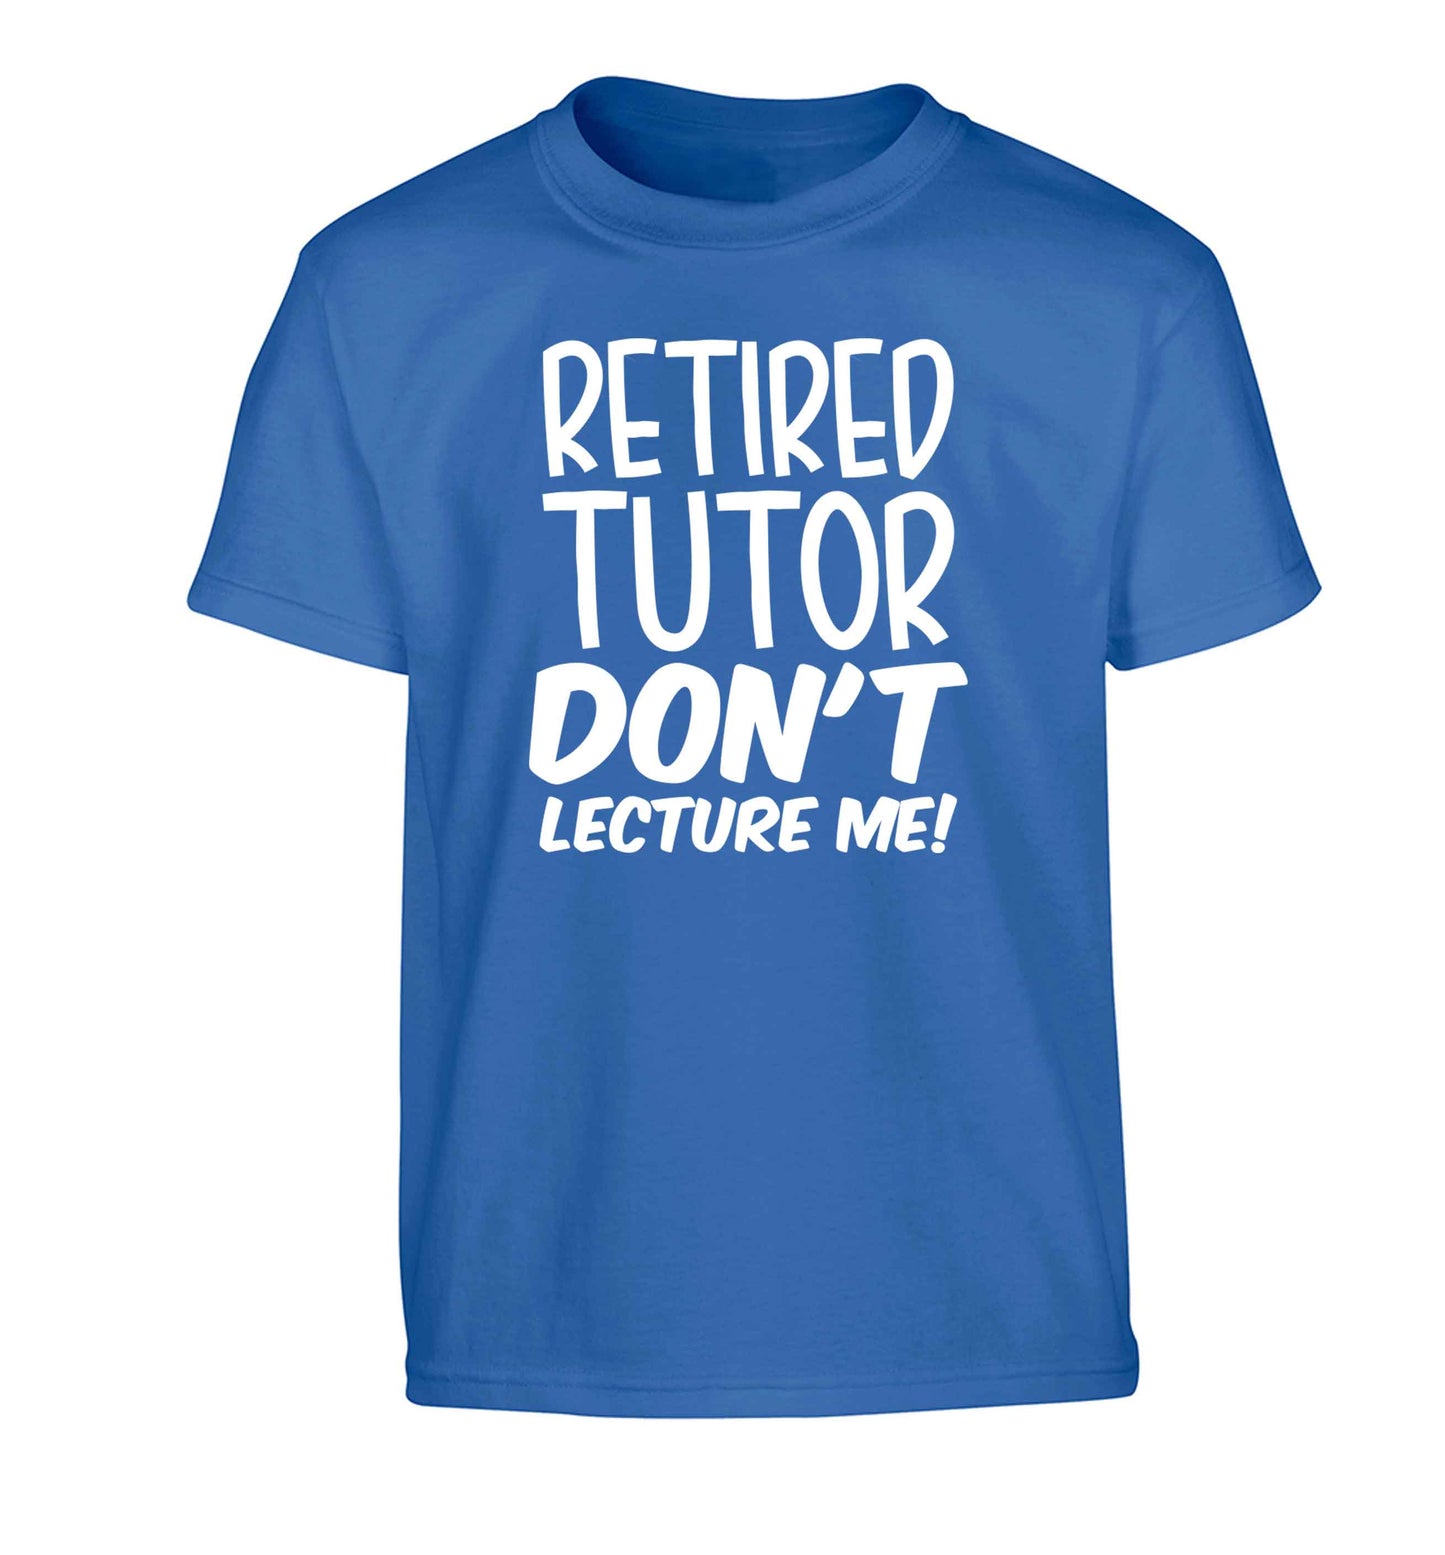 Retired tutor don't lecture me! Children's blue Tshirt 12-13 Years